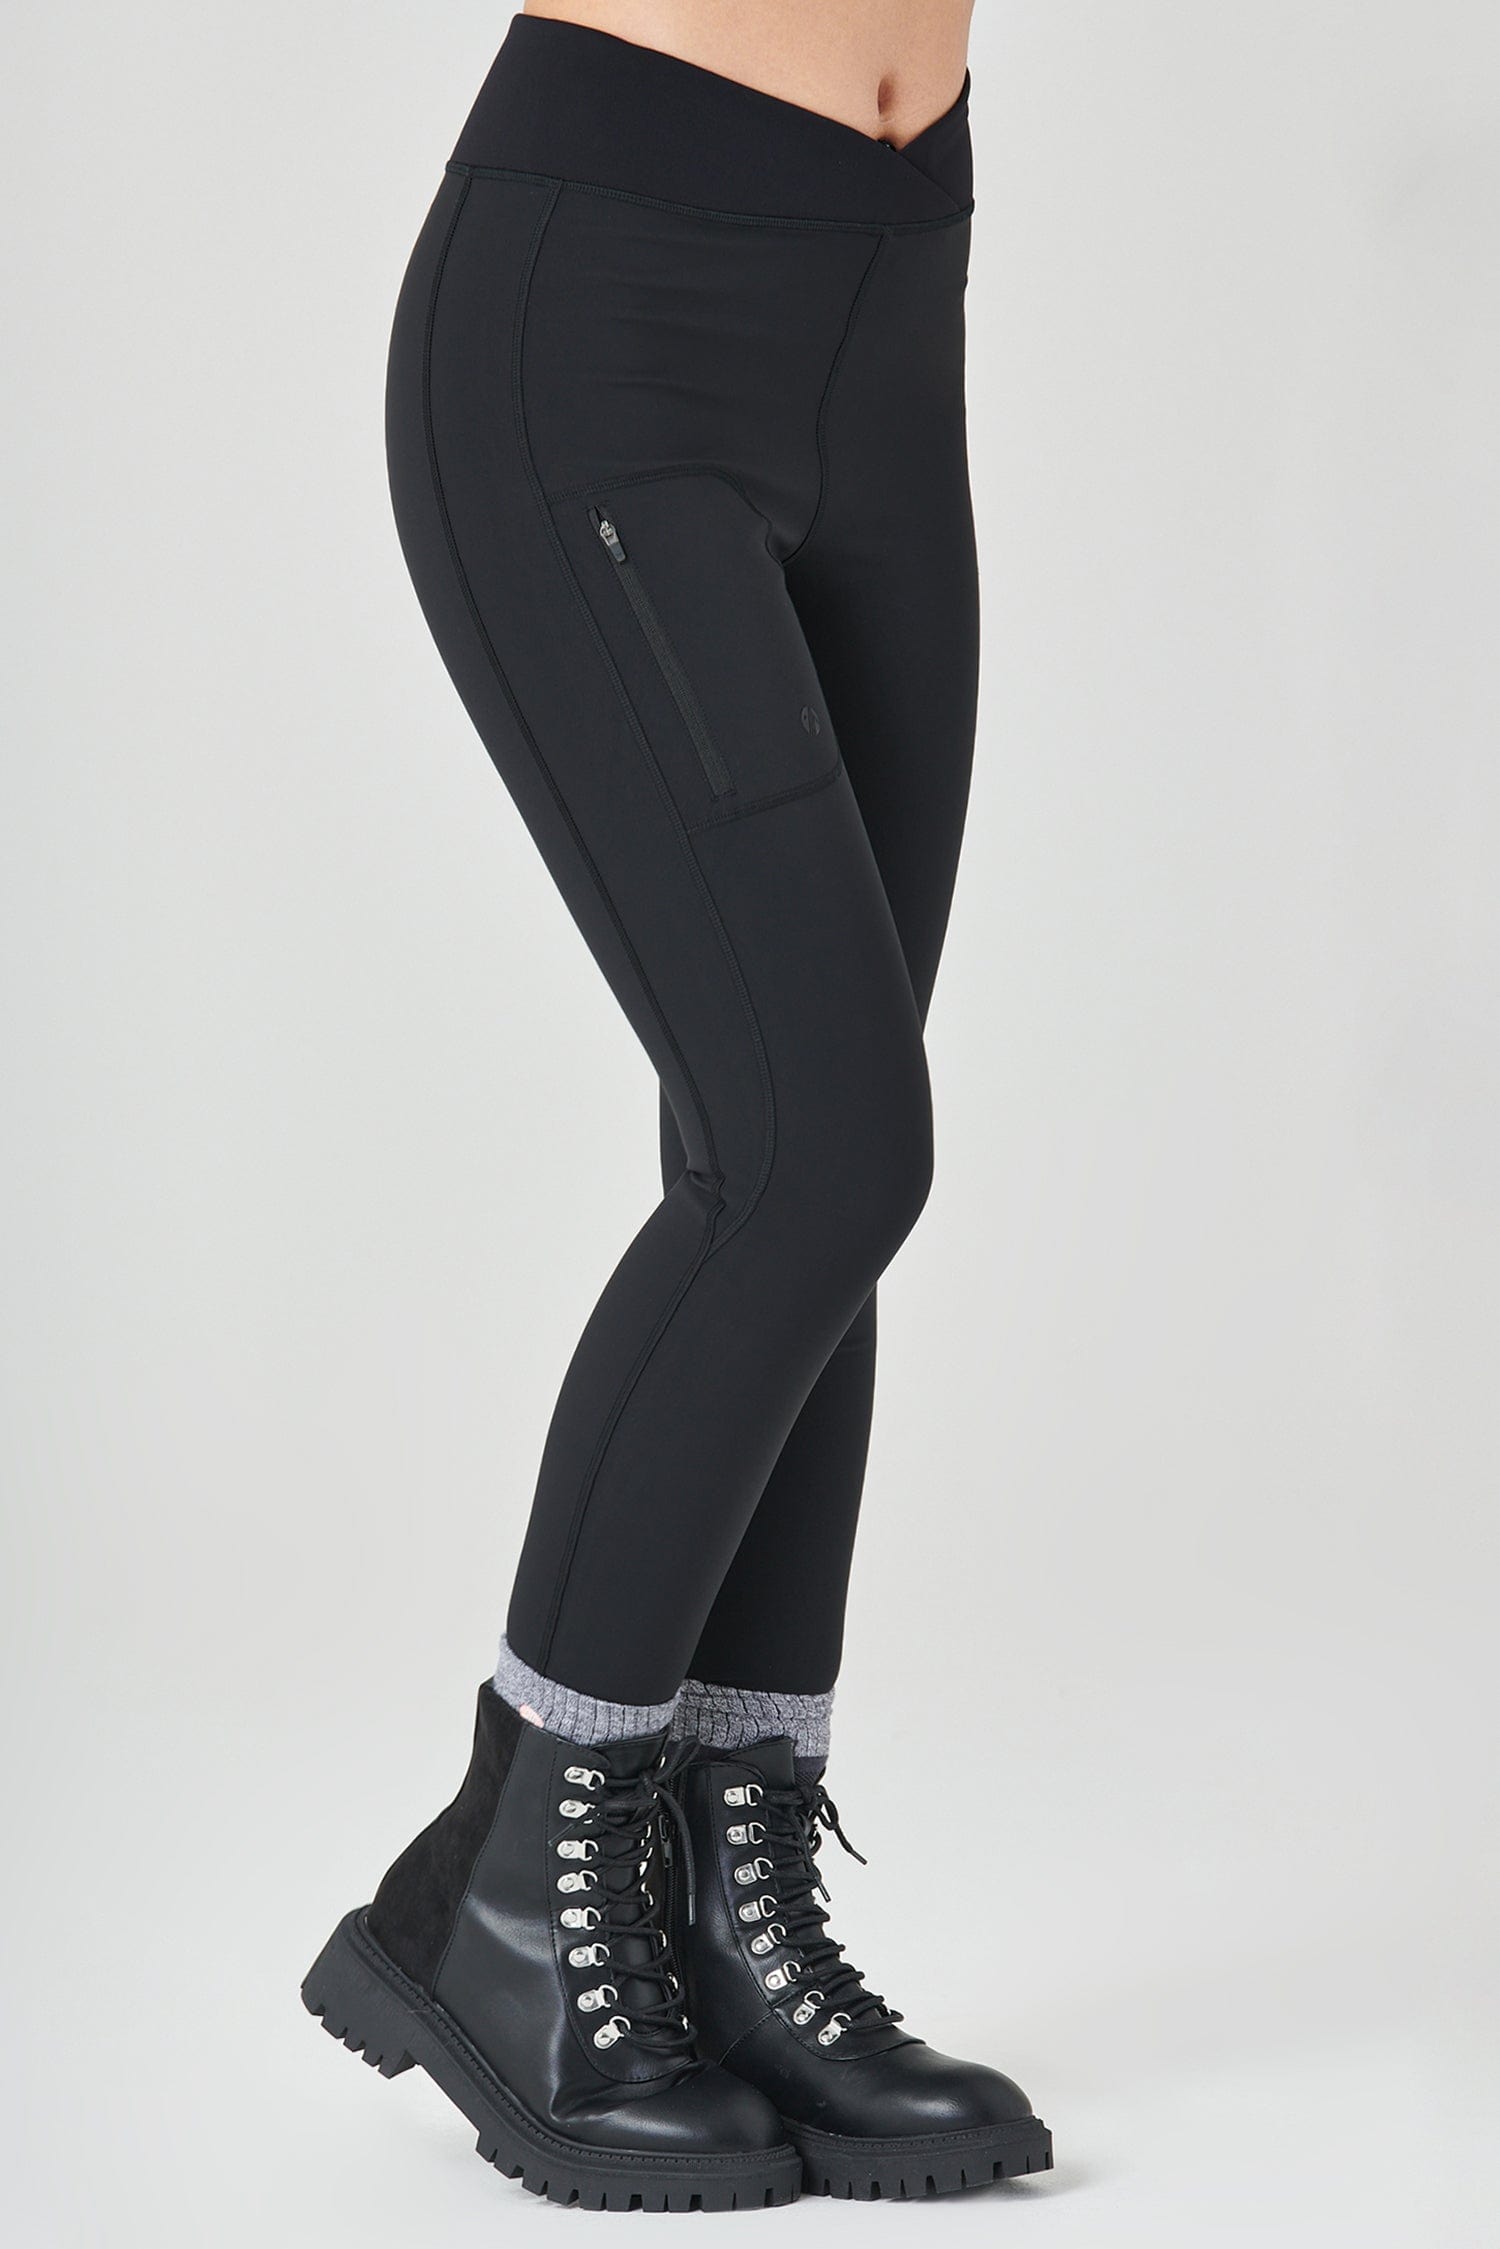 SSYS Black Incognito High Waist Leggings - OUTLET *FINAL SALE* – Shop Style  Your Senses